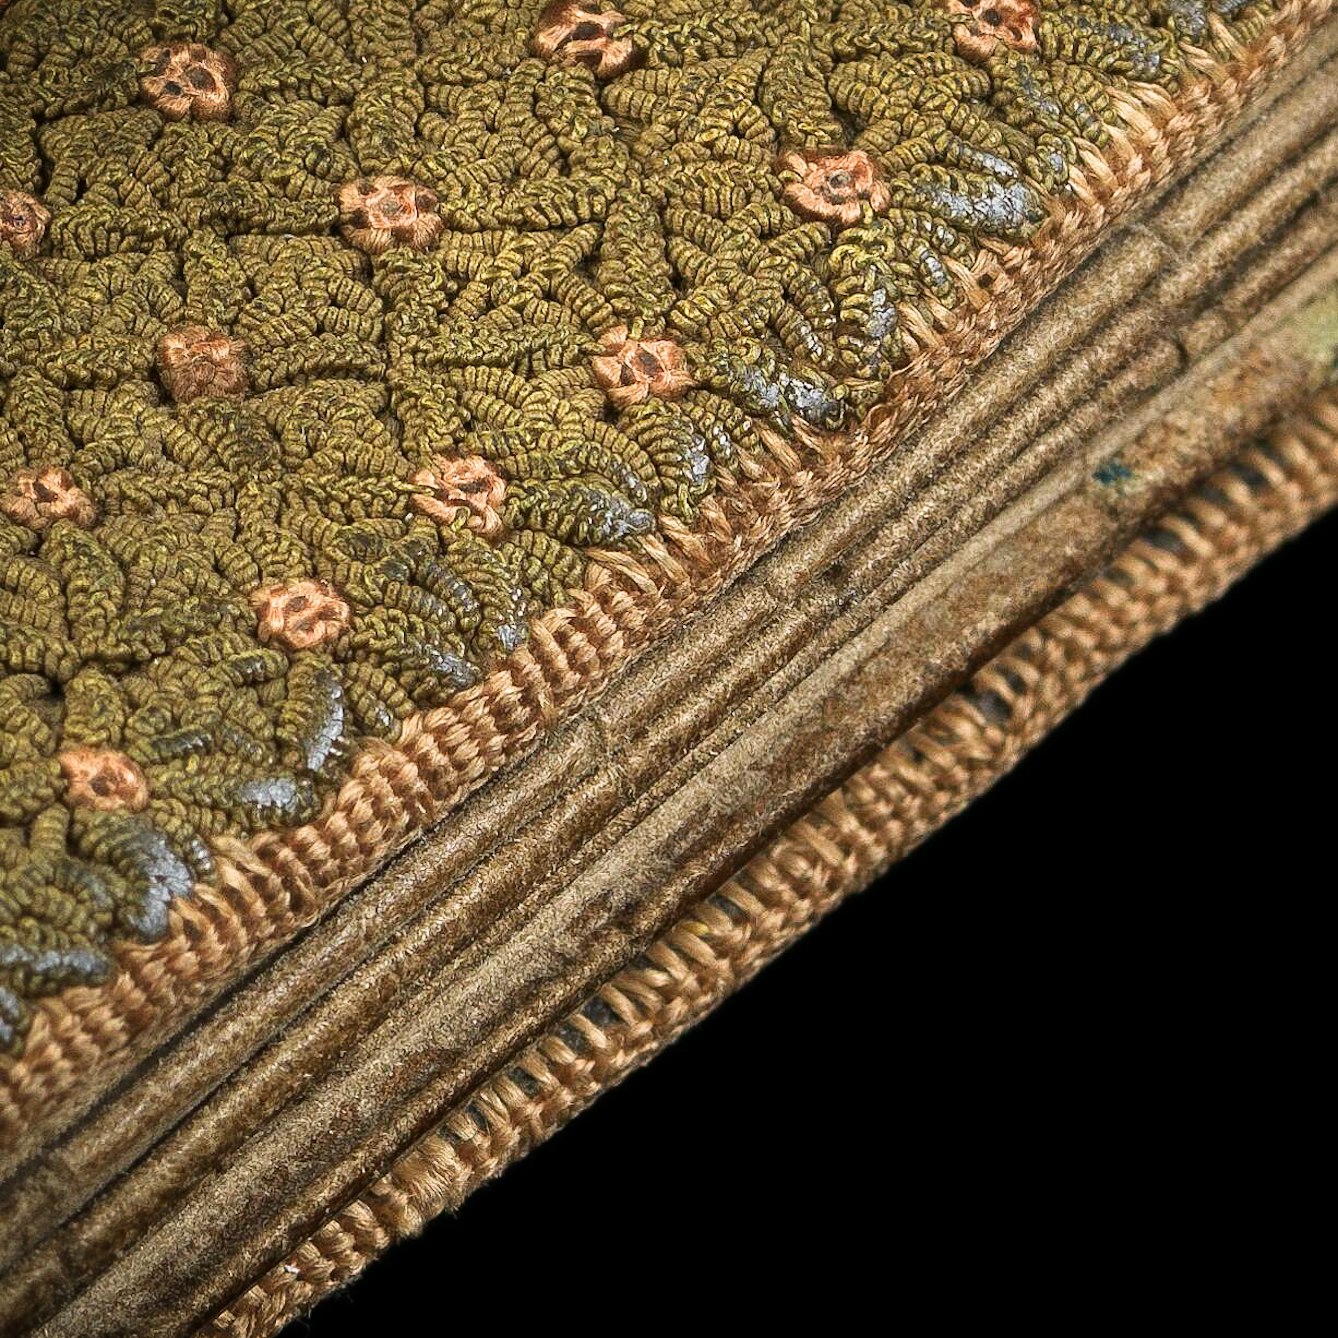 Photographic detail of a fragile folding almanac from the 15th century. The almanac is spotlit on a black background. It is photographed extremely close up so that the threads which make up its intricate woven green and pink fabric cover can be clearly seen.